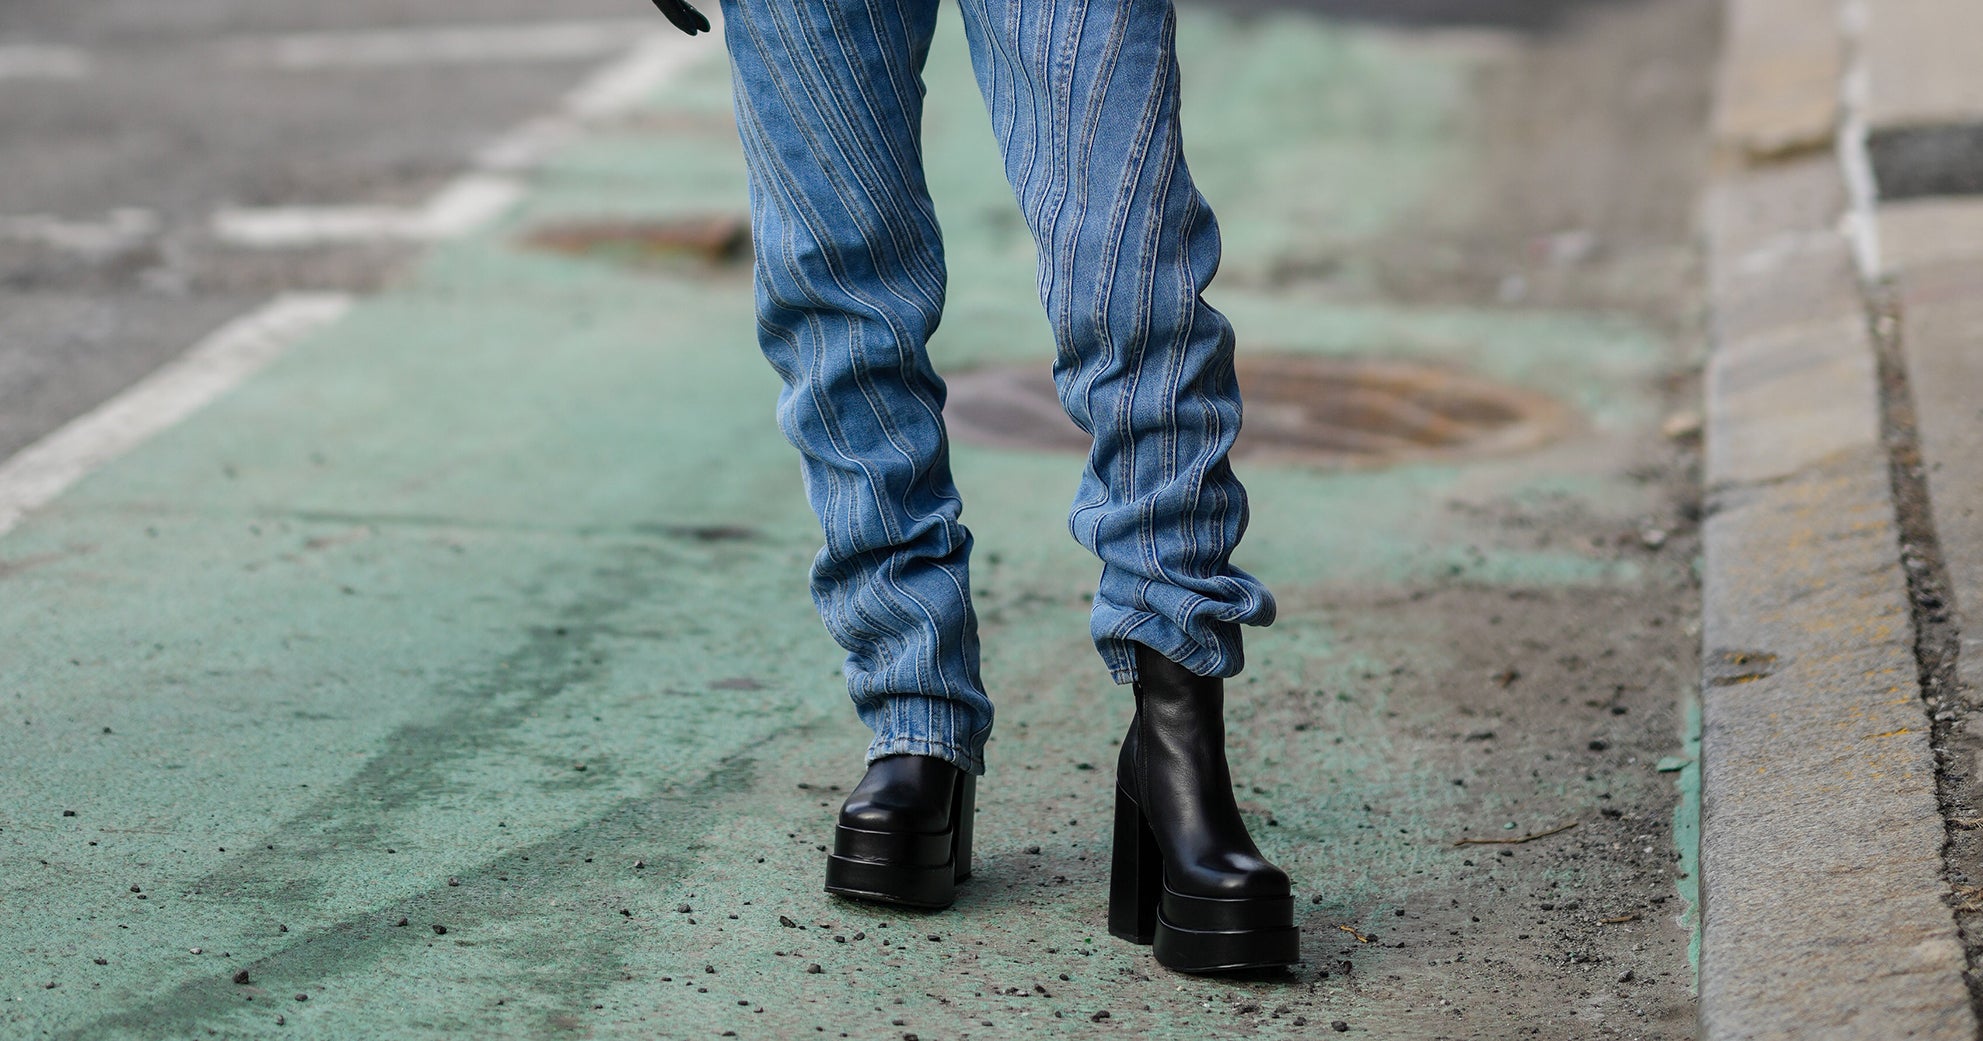 Skinny Jeans Are Out. So What Shoes Do You Wear With Non-Skinny Jeans?